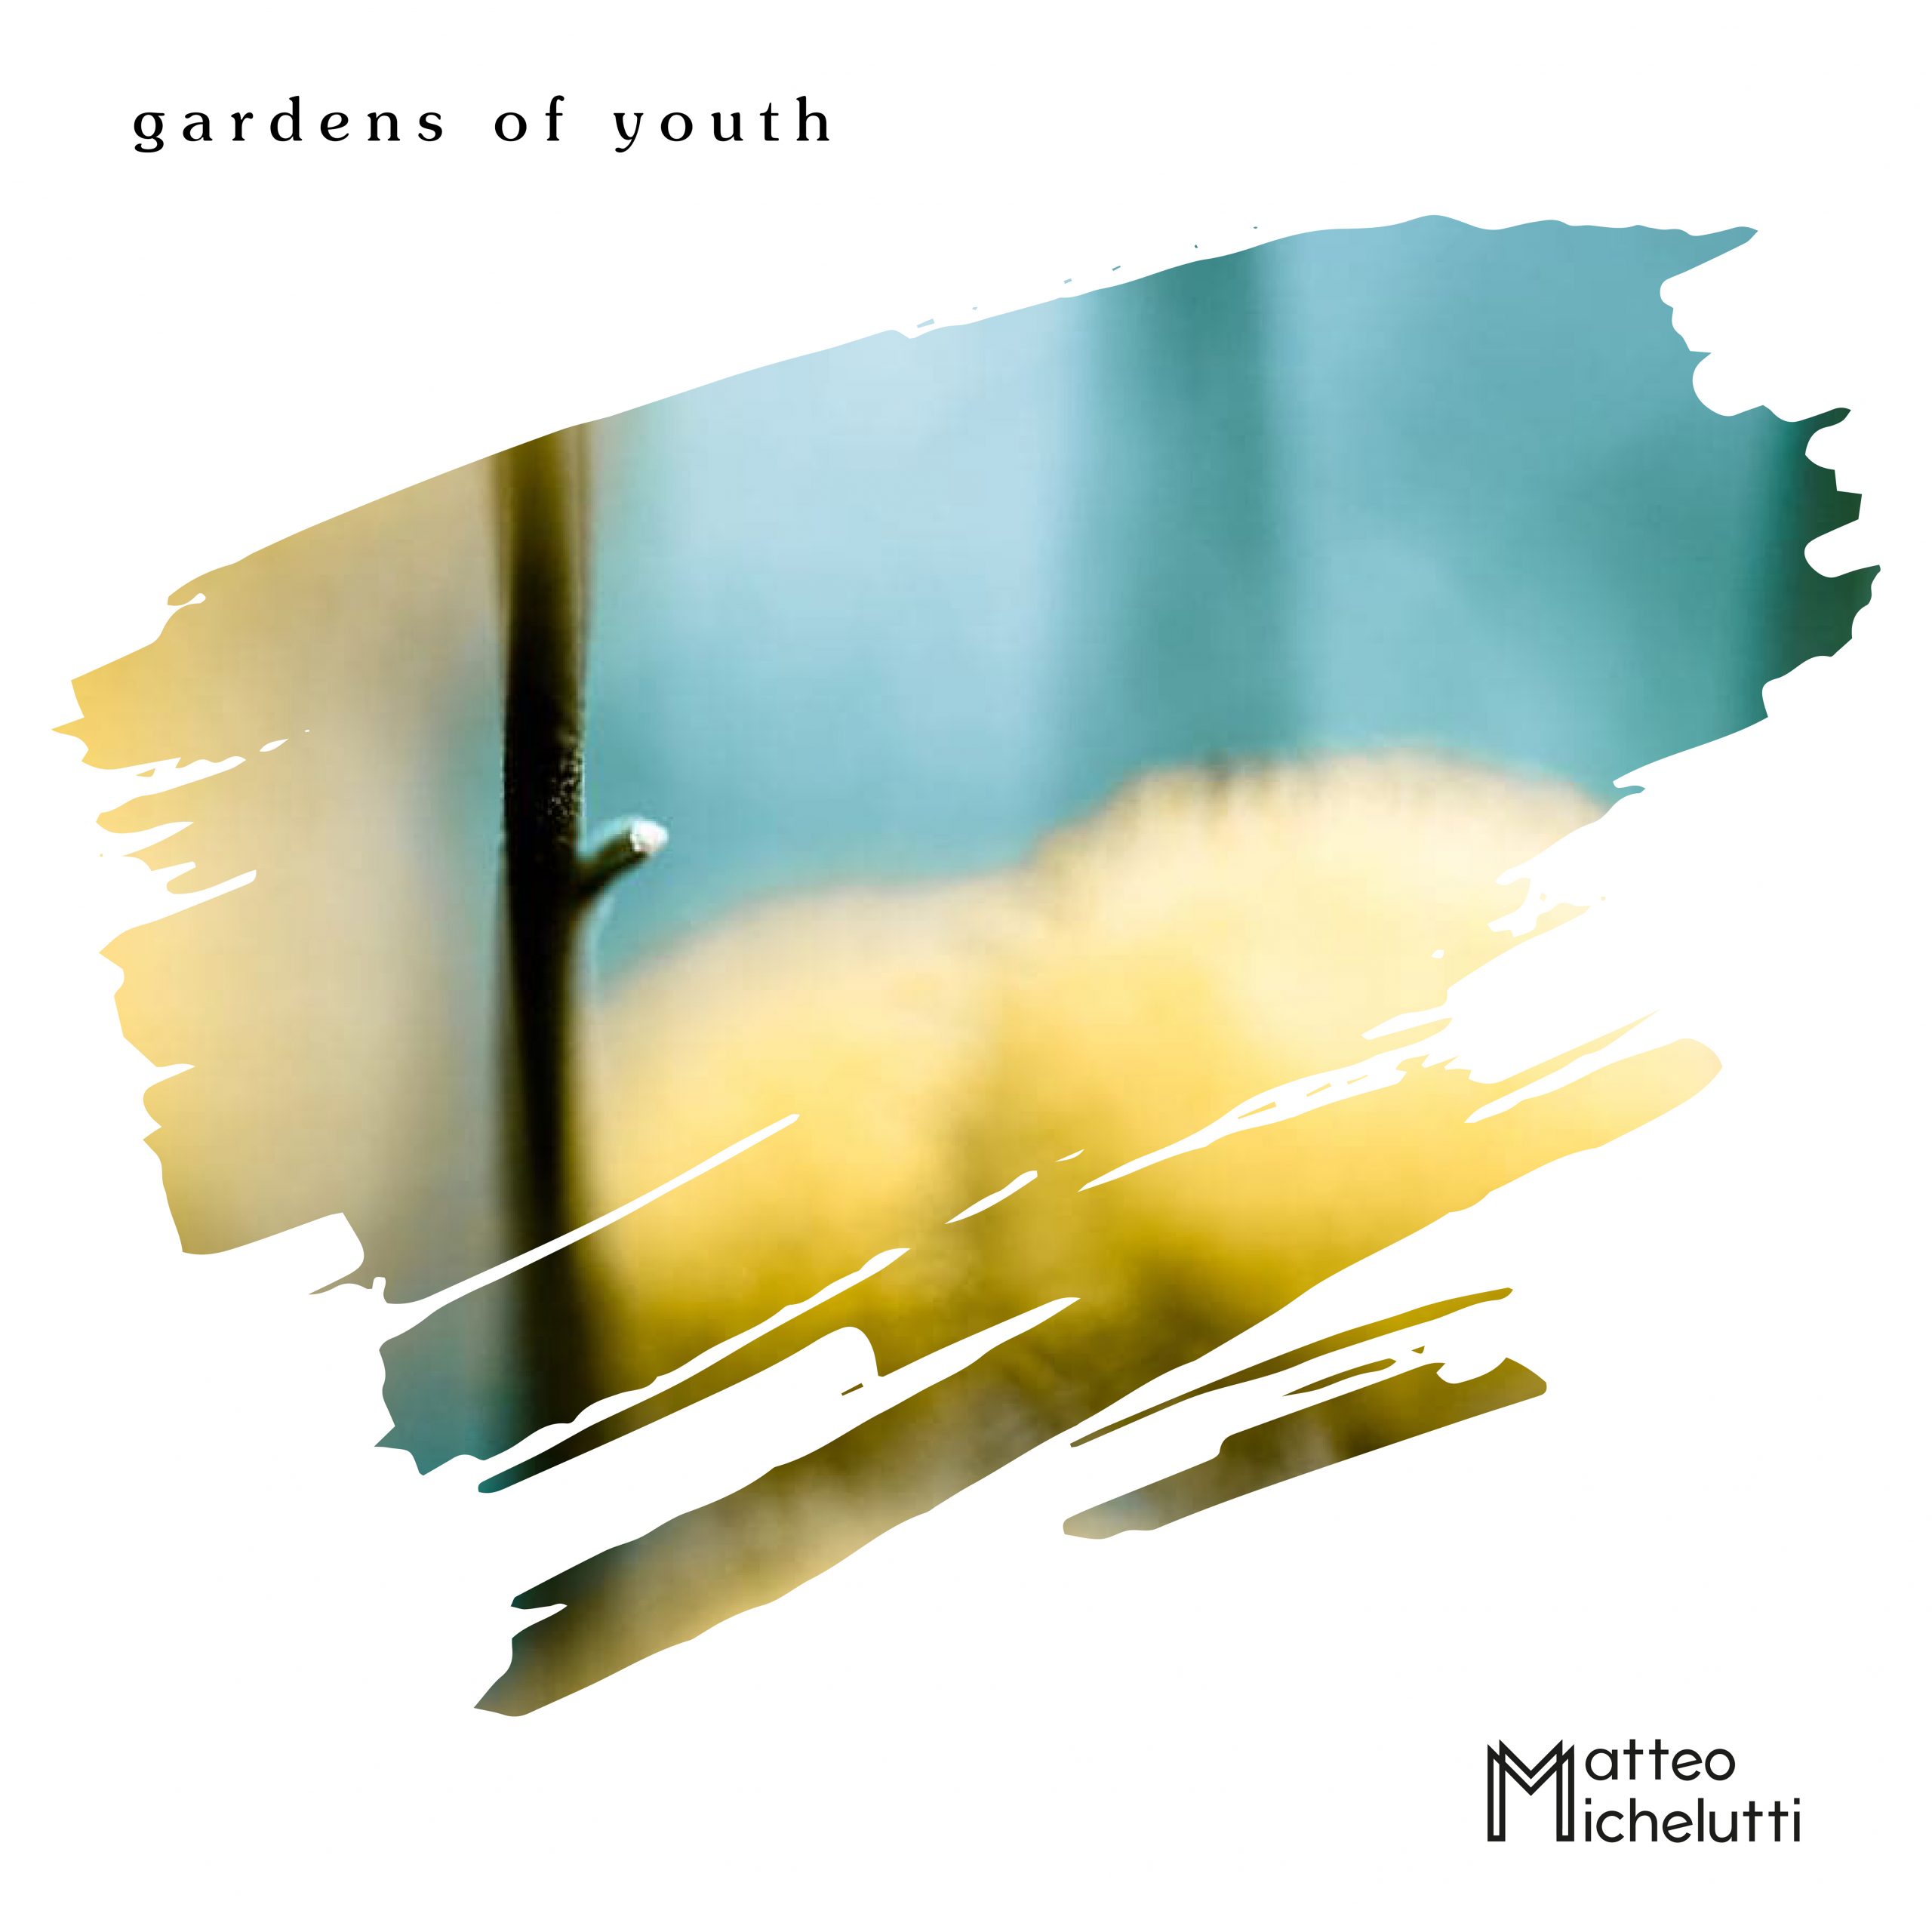 With ten years’ experience as a pure sound composer, ‘Matteo Michelutti’ releases new single ‘Gardens of Youth’